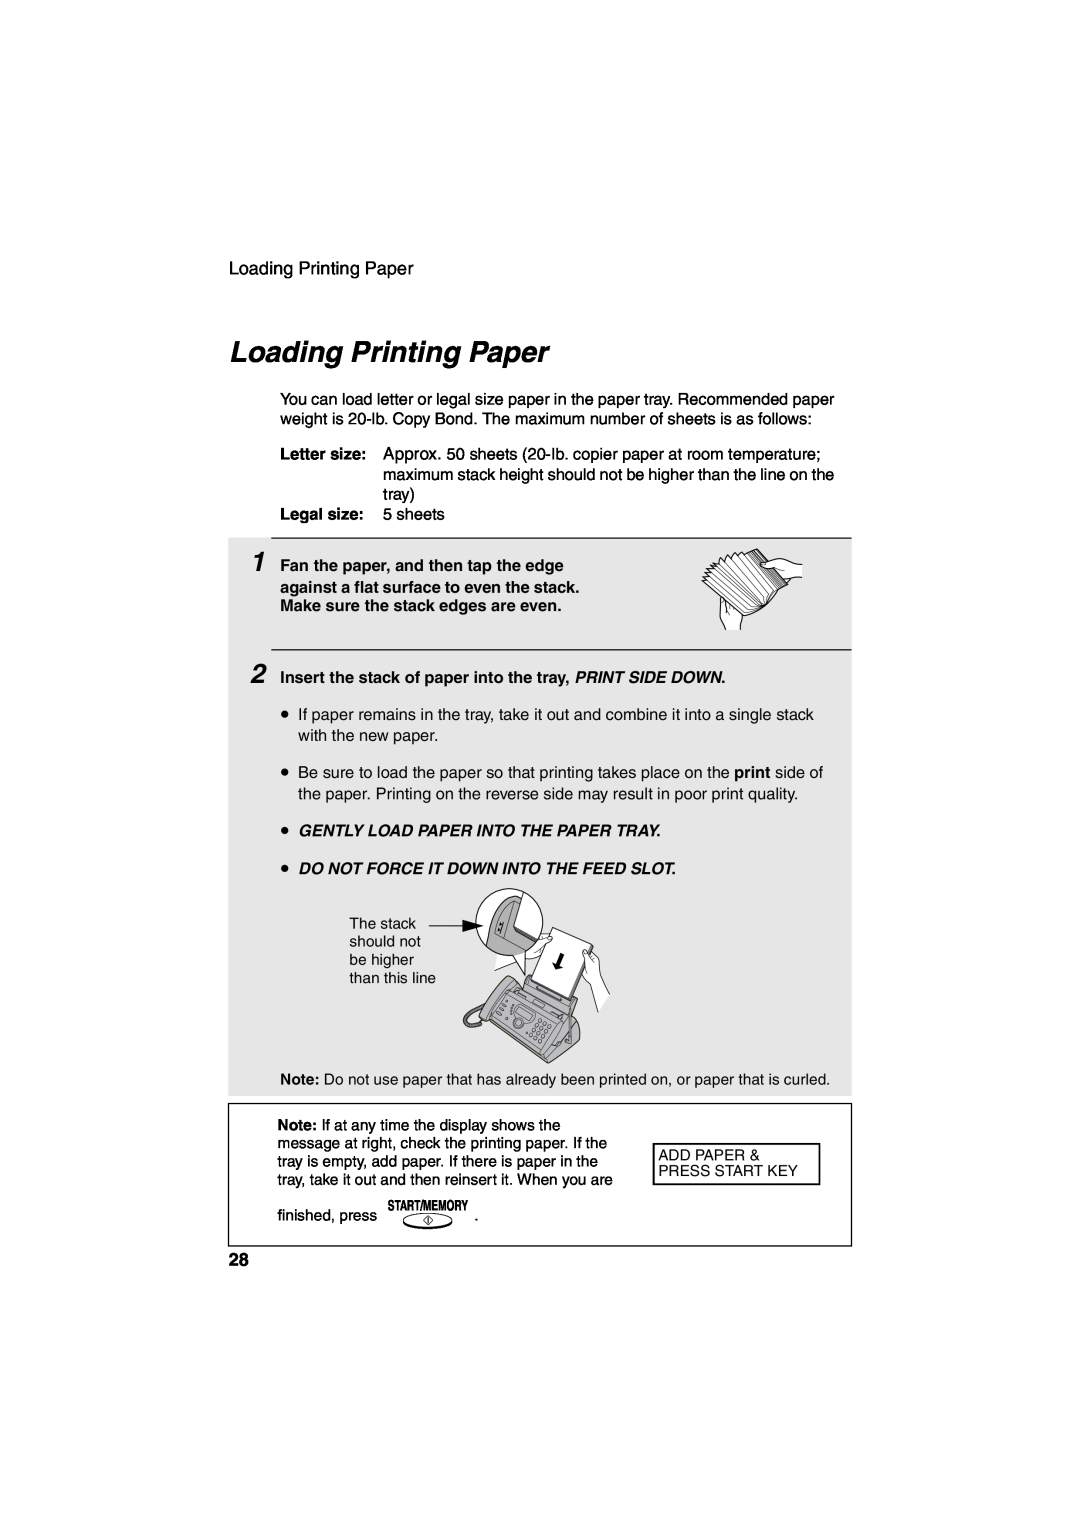 Sharp UX-CD600 Loading Printing Paper, Gently Load Paper Into The Paper Tray, Do Not Force It Down Into The Feed Slot 